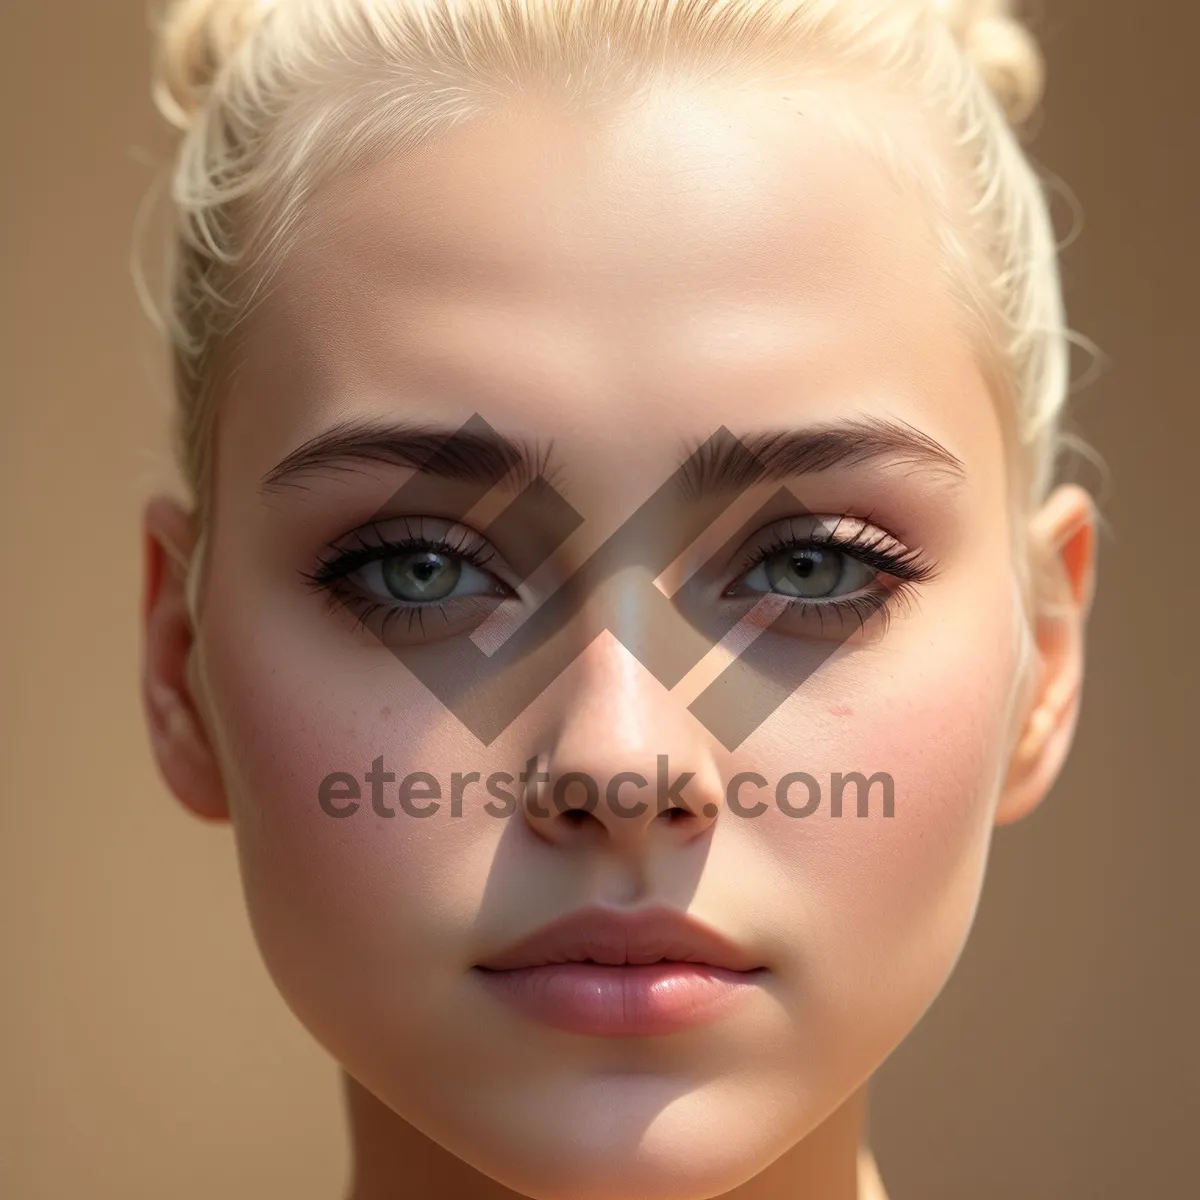 Picture of Radiant Blond Beauty: Fashion Model with Flawless Skin